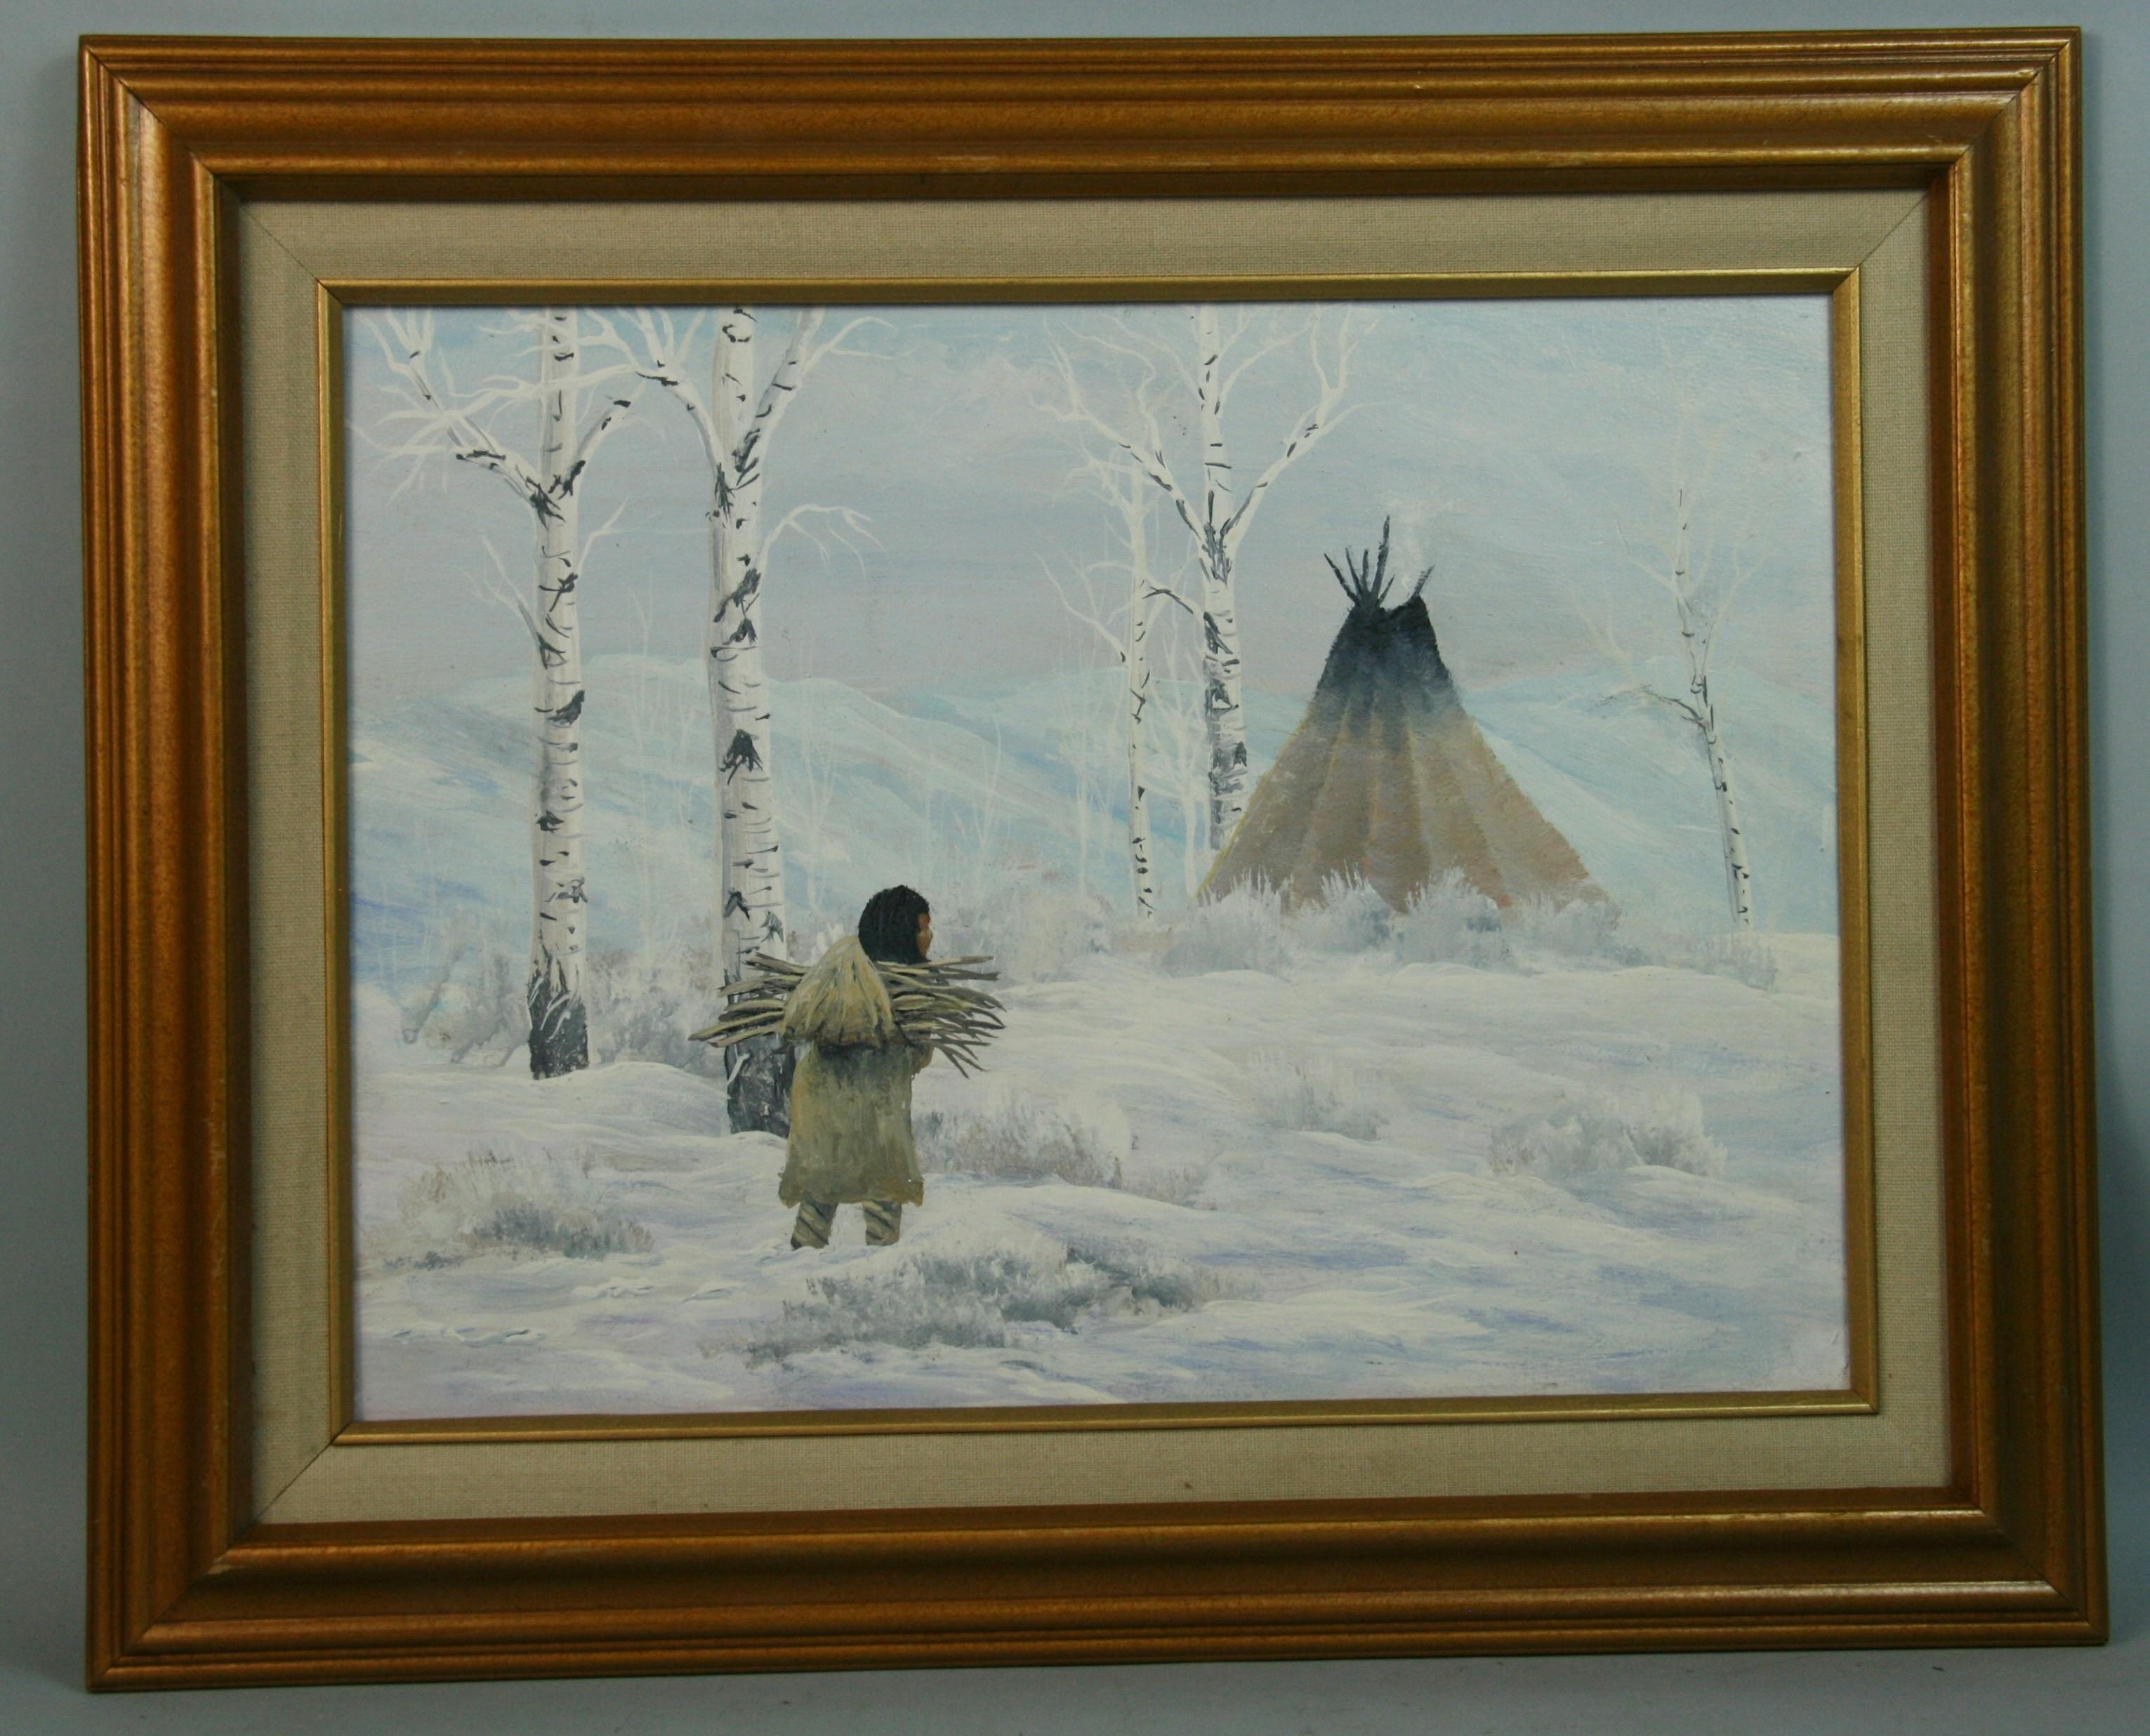 5044 South West Indian snow covered landscape
Oil on artist board
Set in a wood frame